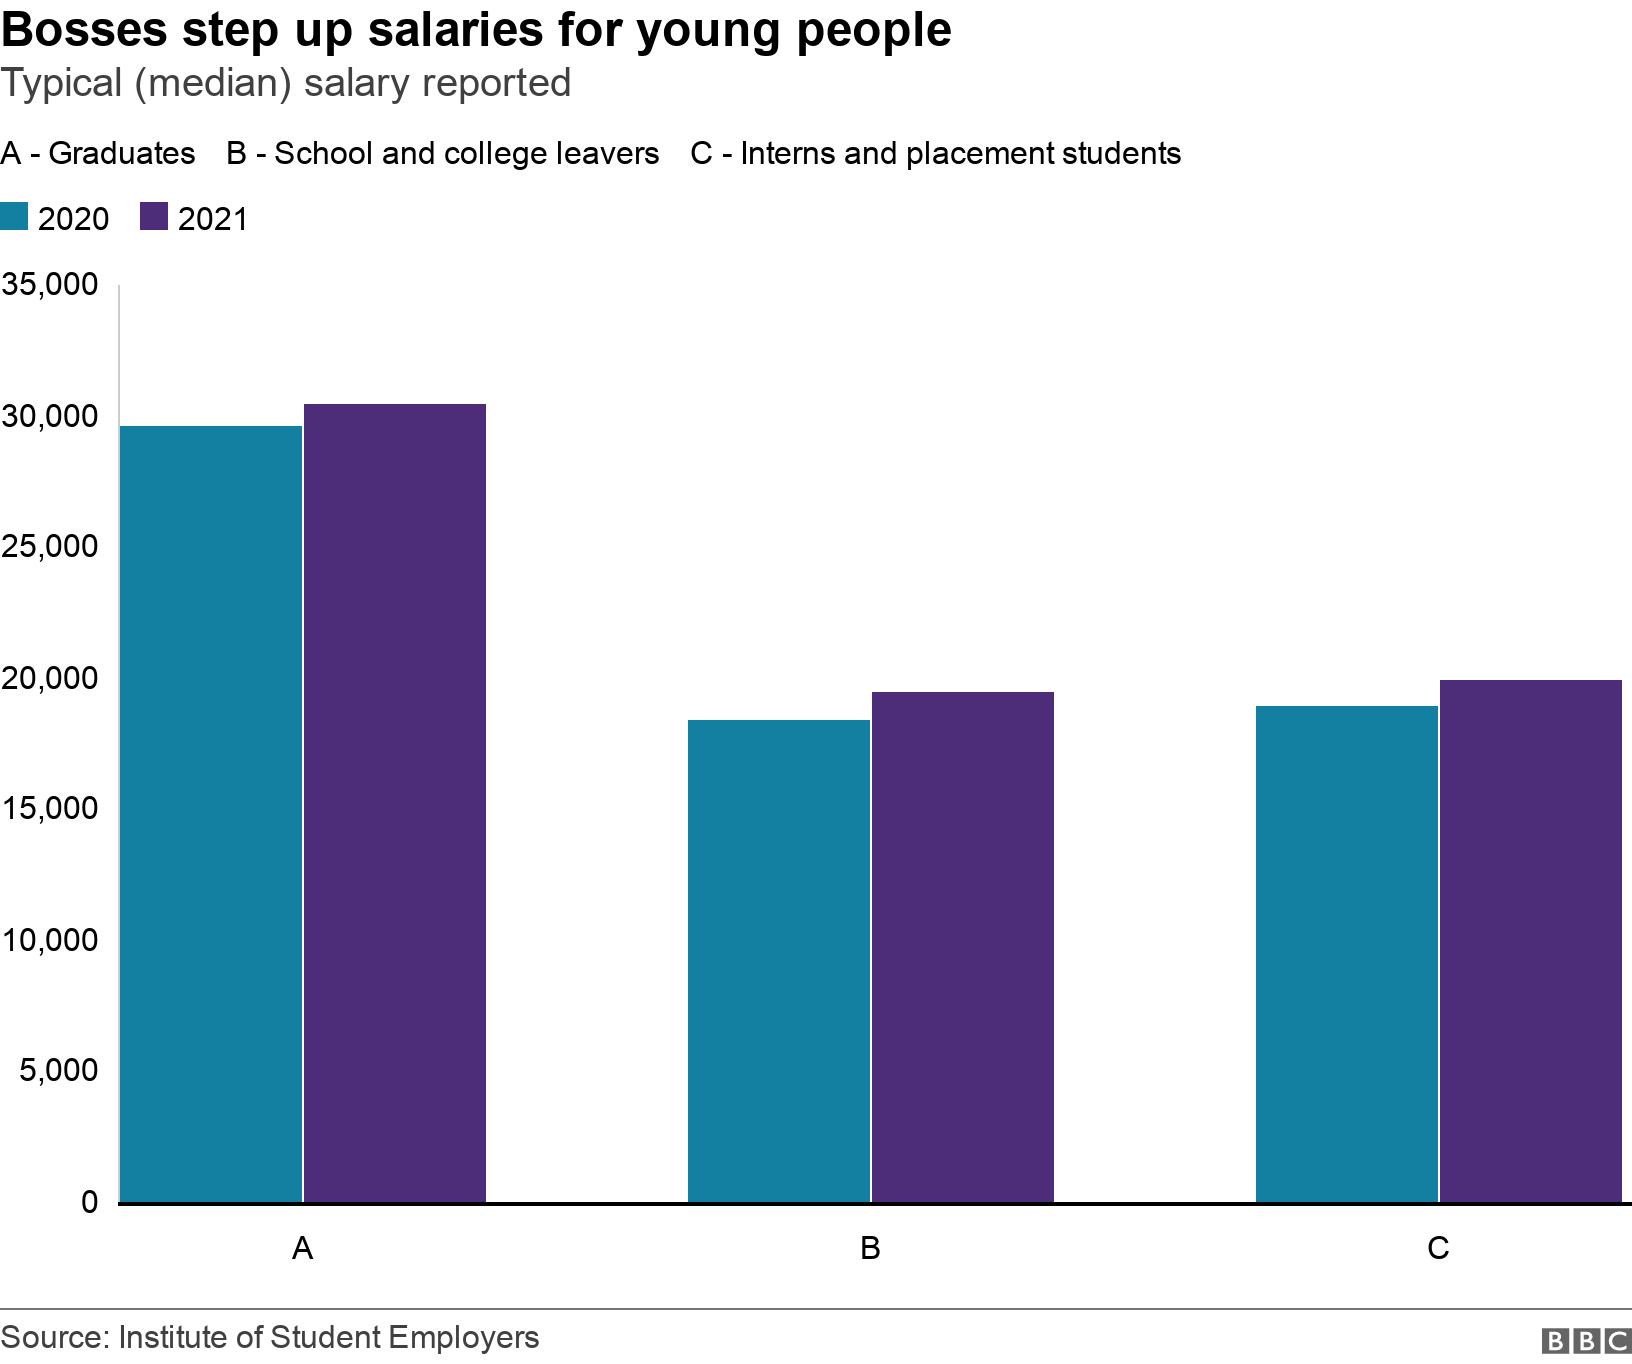 Bosses step up salaries for young people. Typical (median) salary reported. The chart shows how salaries have increased for students. .